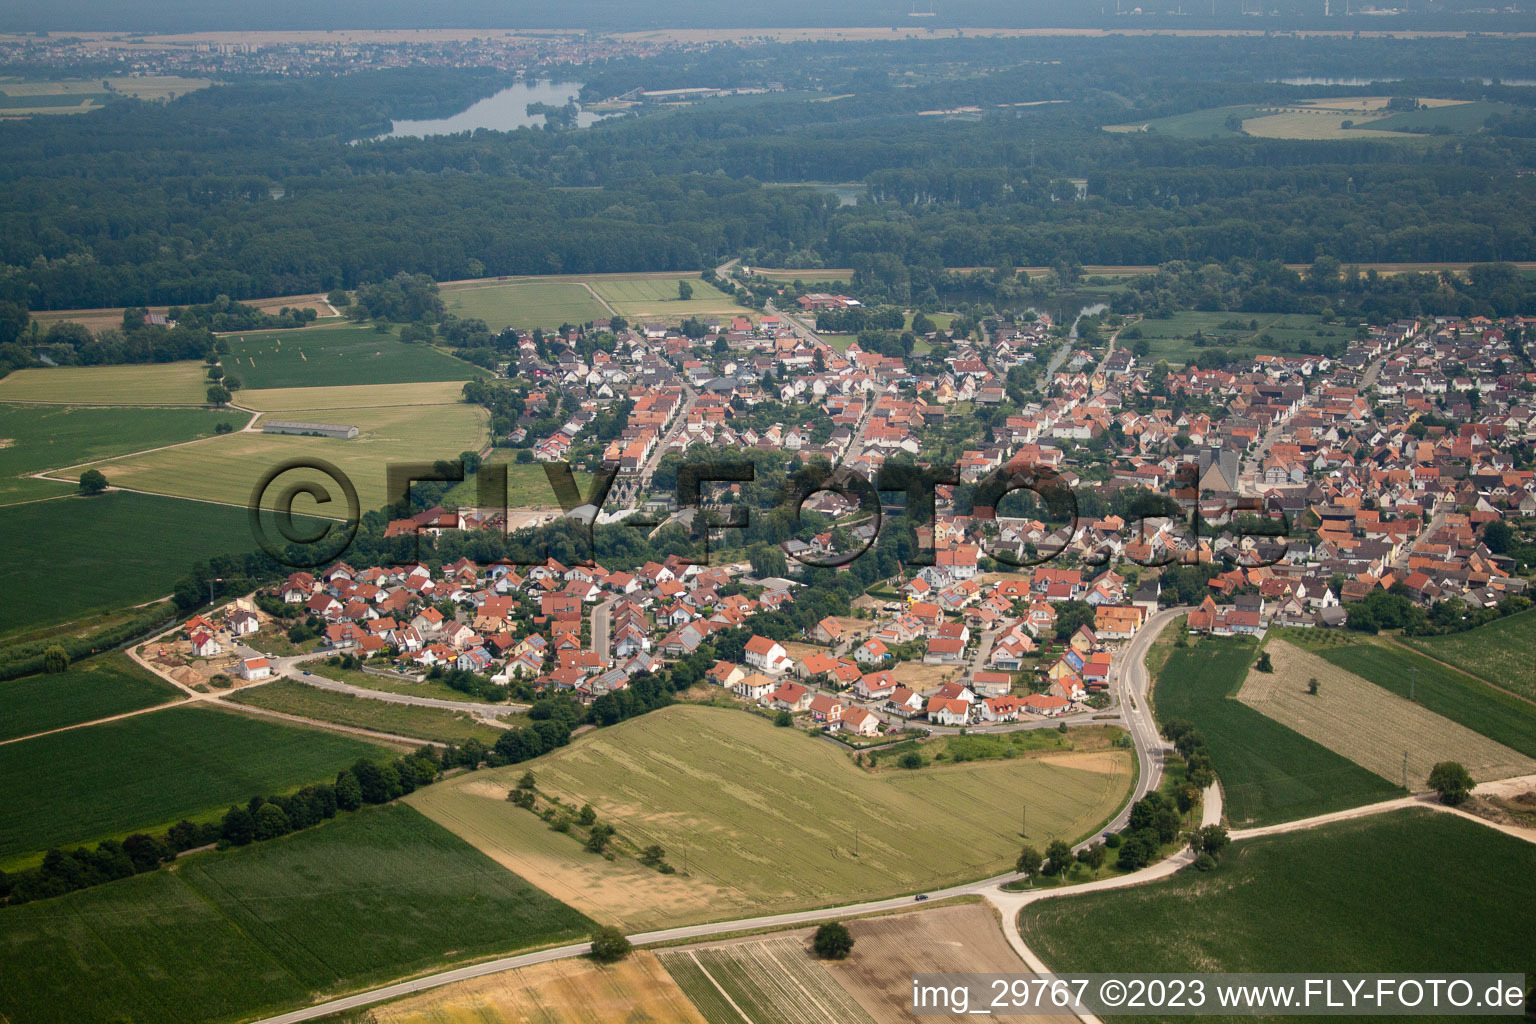 Neupotz in the state Rhineland-Palatinate, Germany seen from above